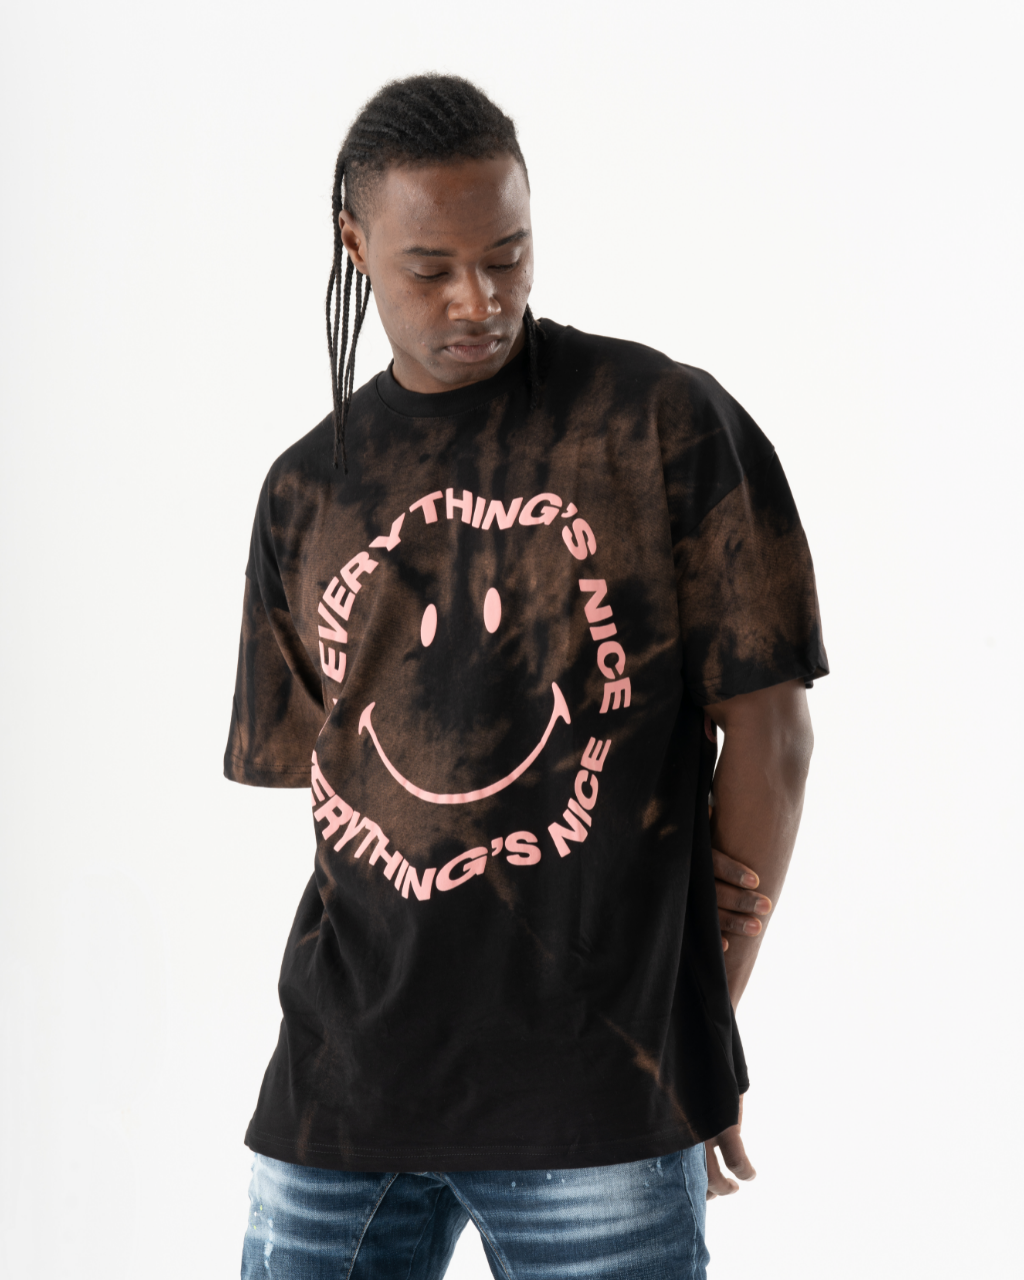 A man wearing an oversize OPTIMIST T-SHIRT with a smiley face on it.